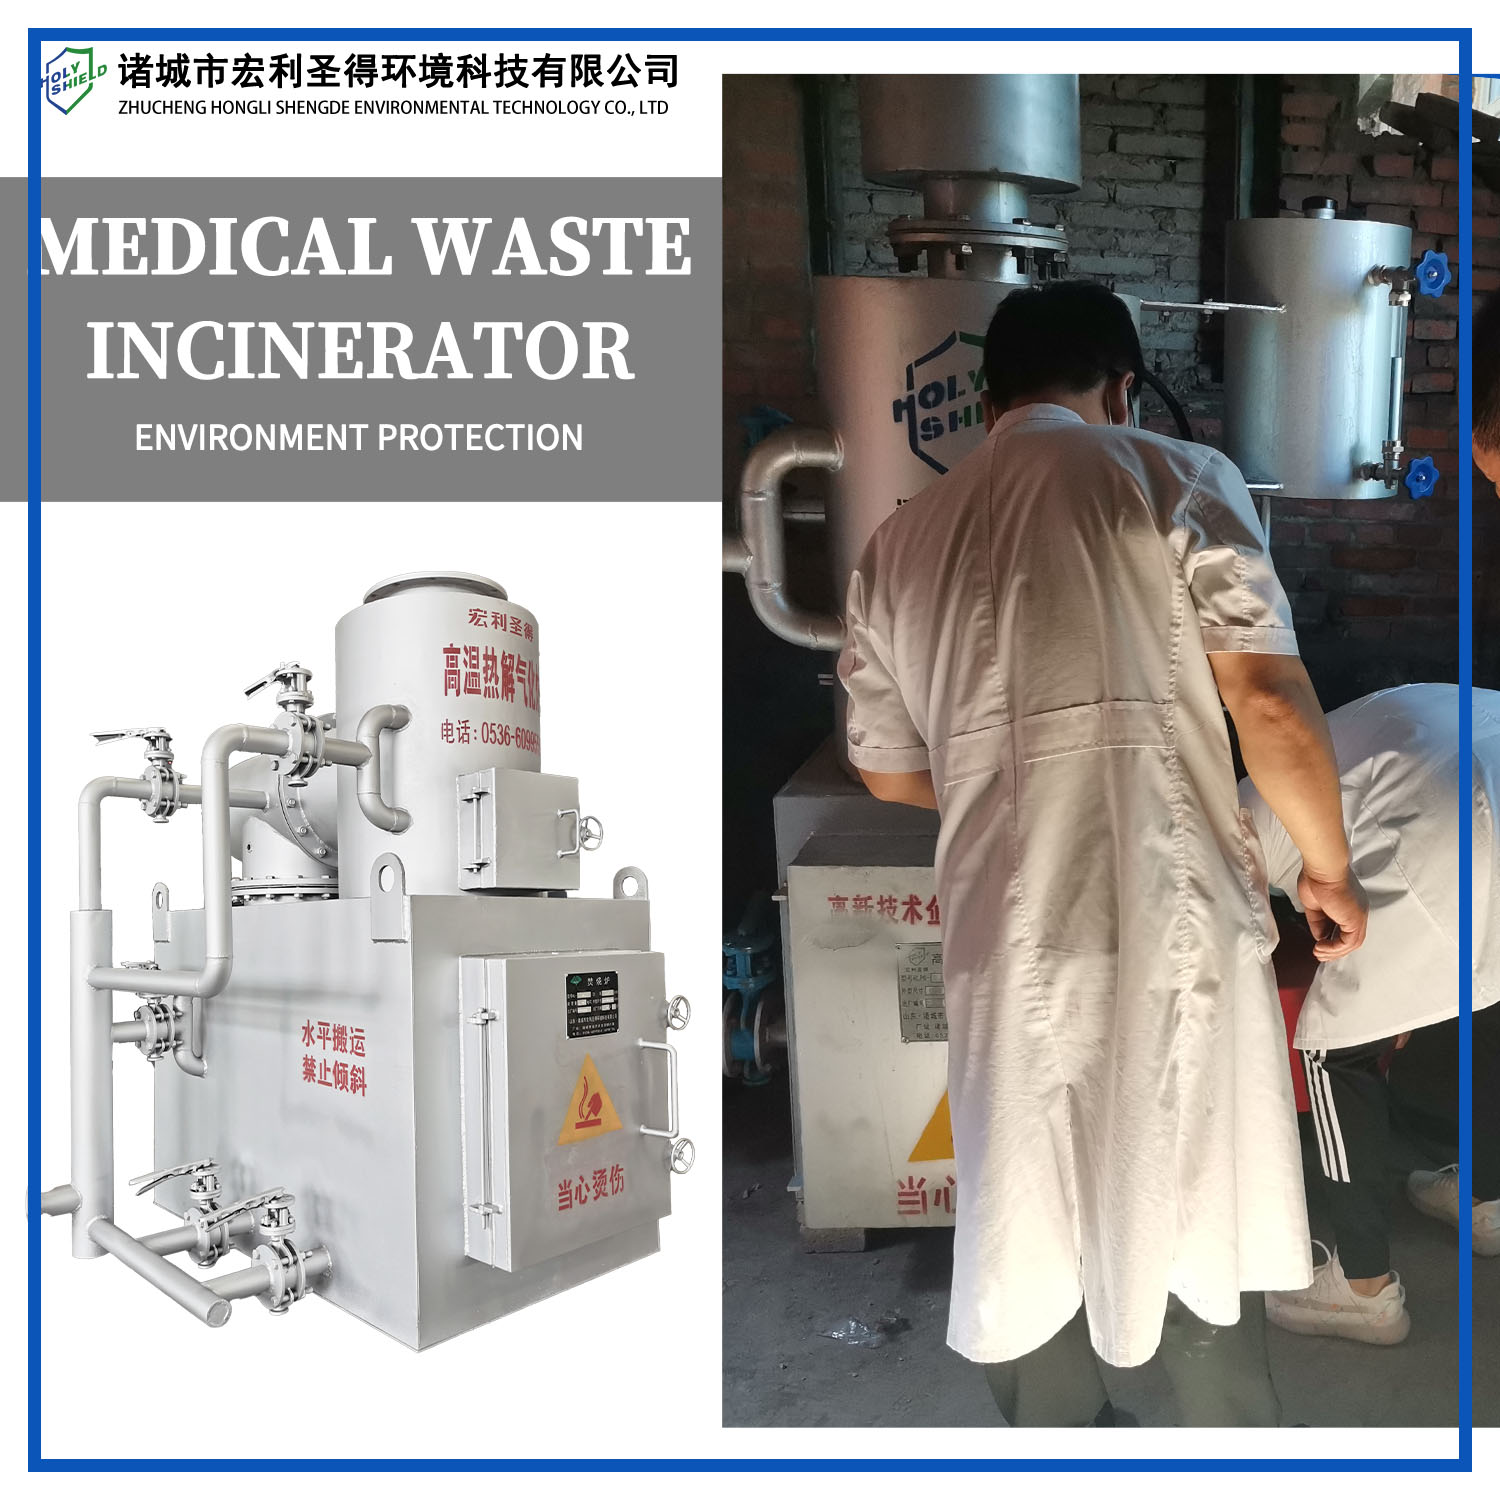 Is it difficult to handle medical waste piled up for a long time? Hurry up and choose this incinerator to give it a try